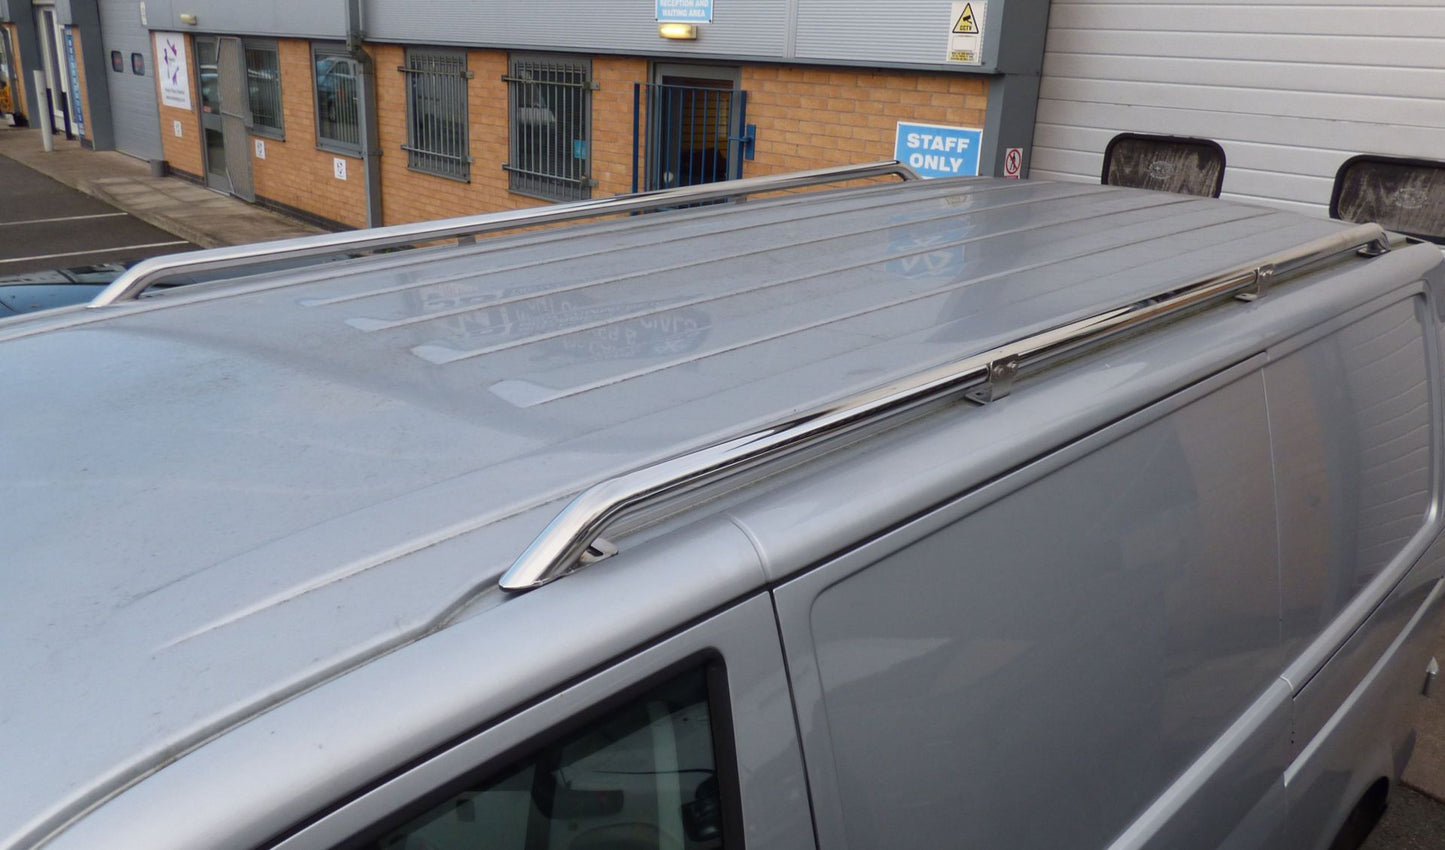 Stainless Steel OE Style Roof Rails for the Volkswagen Transporter T6 SWB -  - sold by Direct4x4